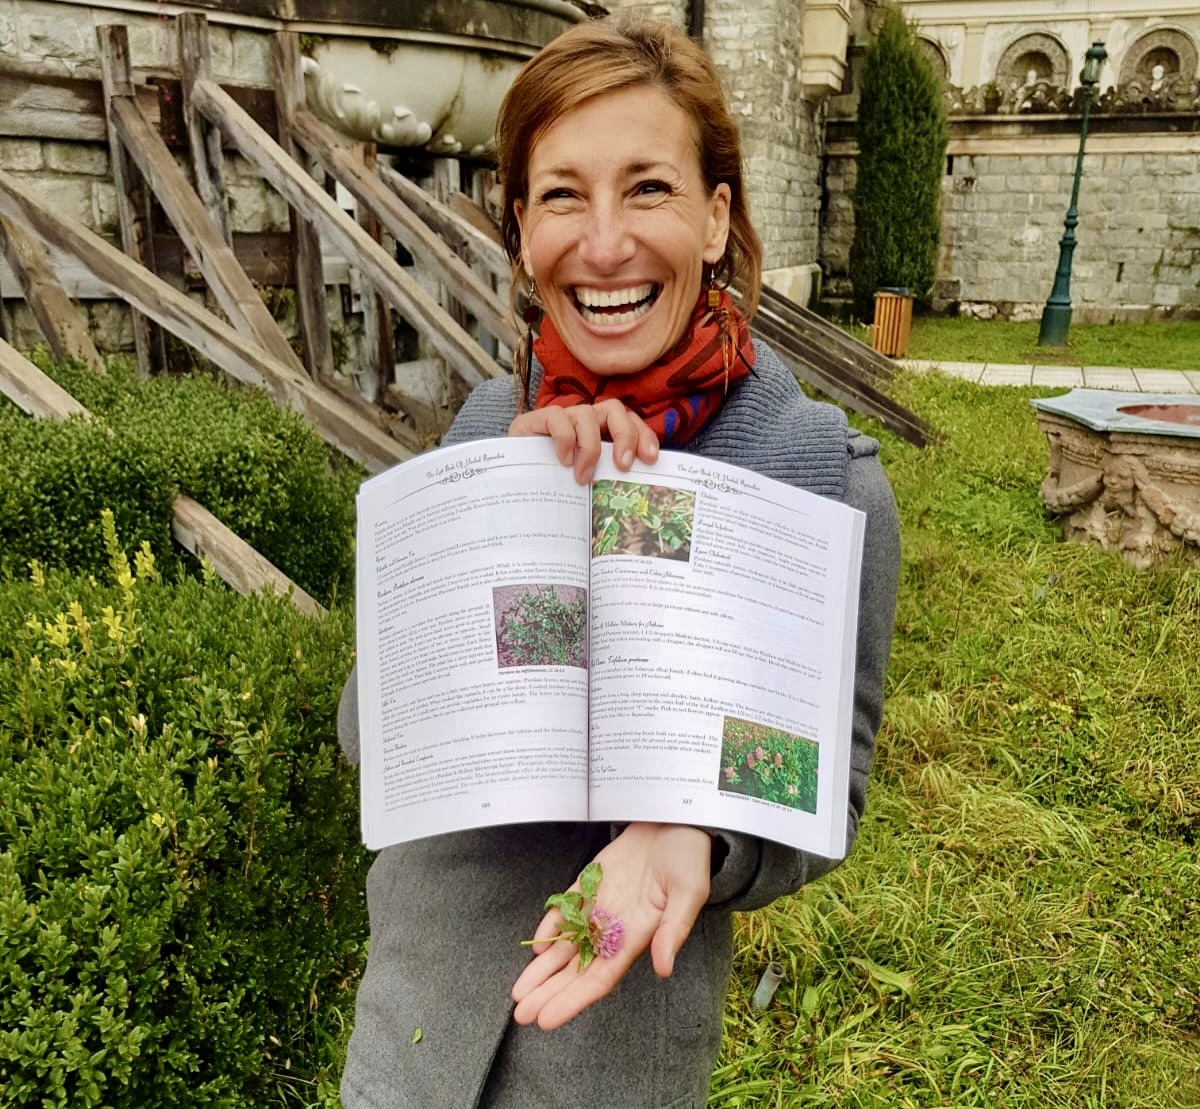 Nicole Apelian in Romania with book herbal remedies and wild plants